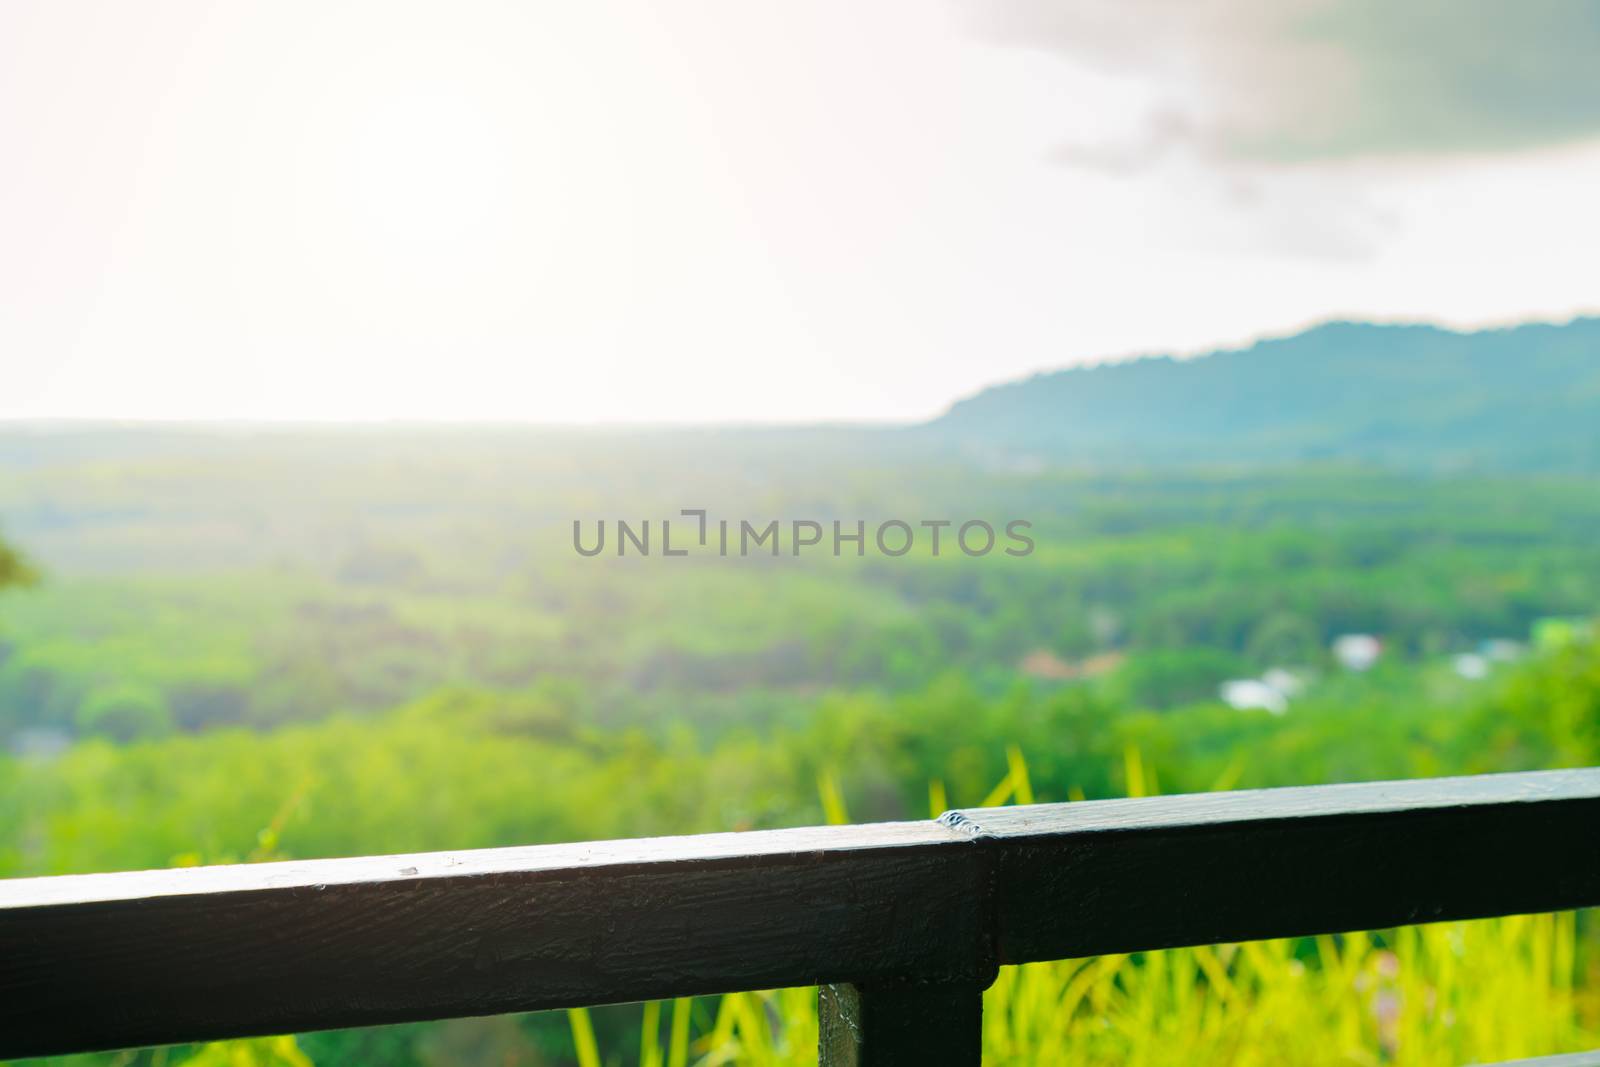 The terrace of the house or balcony for placing Tree ,Forest and nature park view background. Sunlight and flare concept.